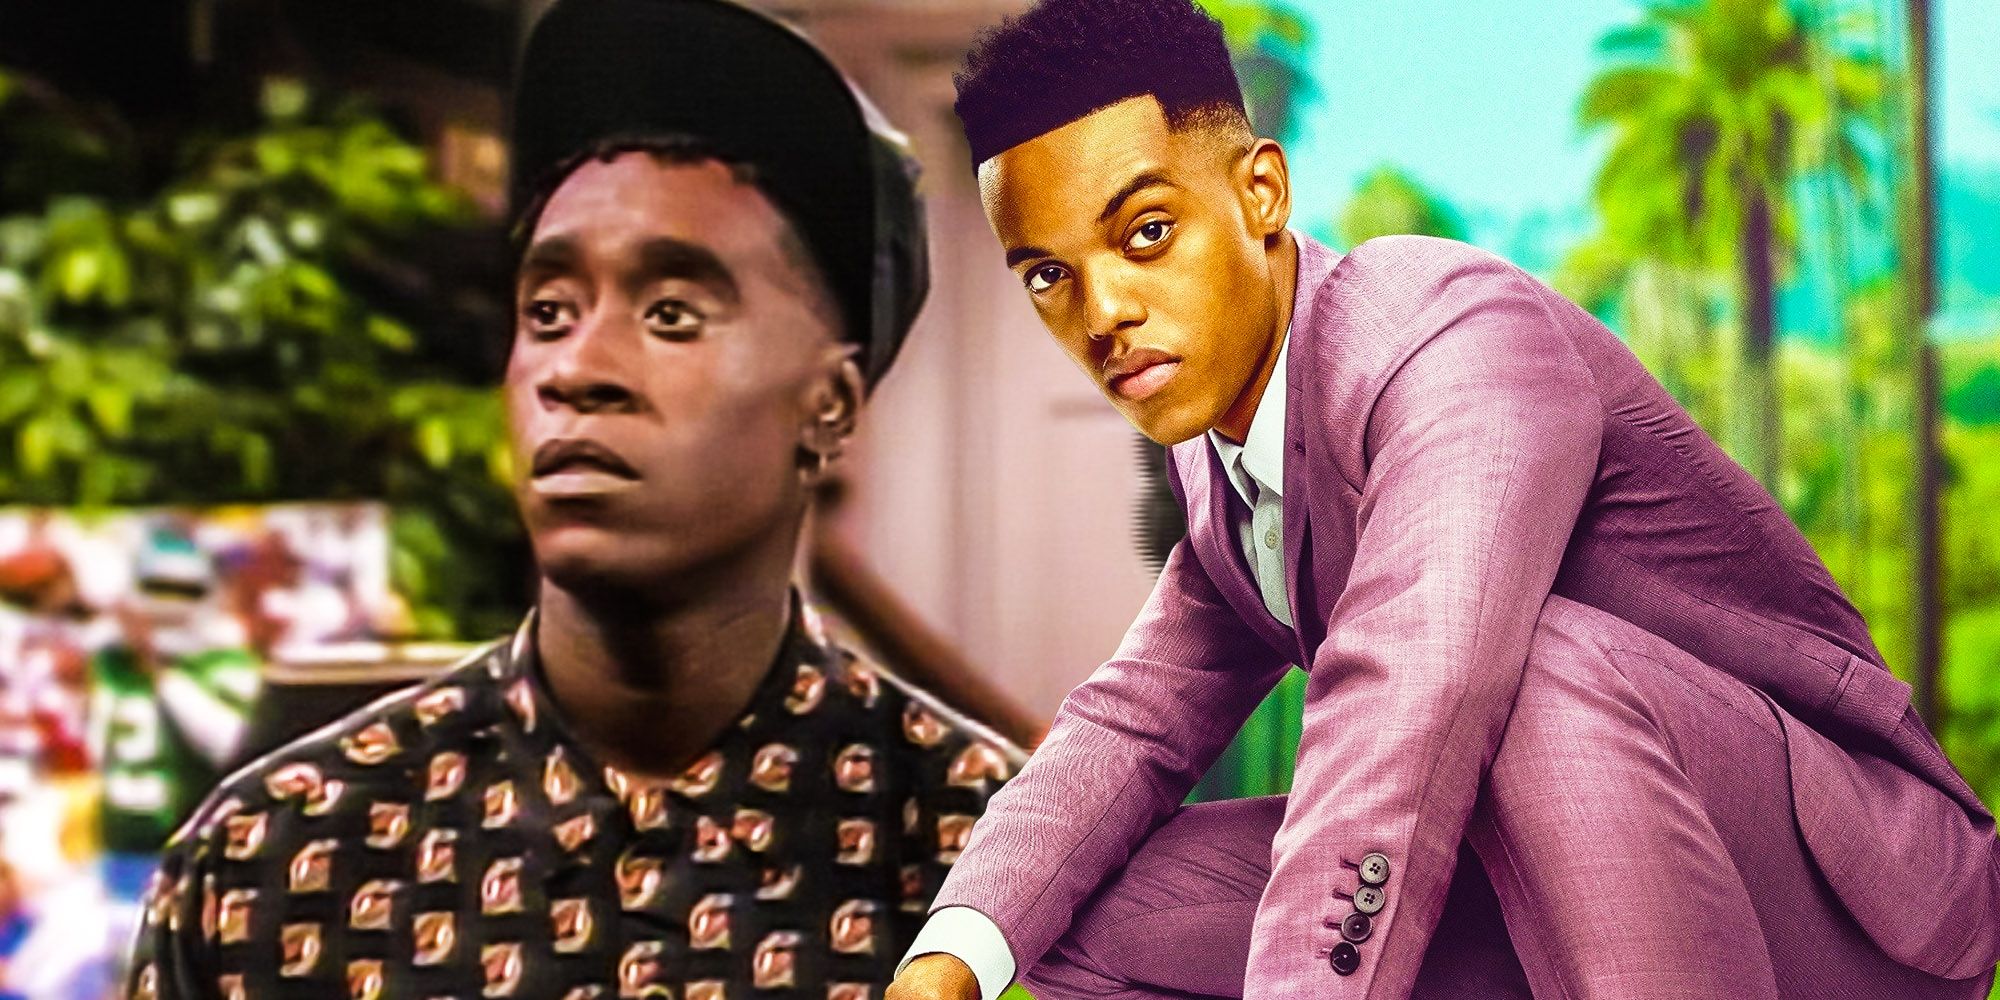 Fresh prince of bel air spinoff don cheadle ice tray before bel air